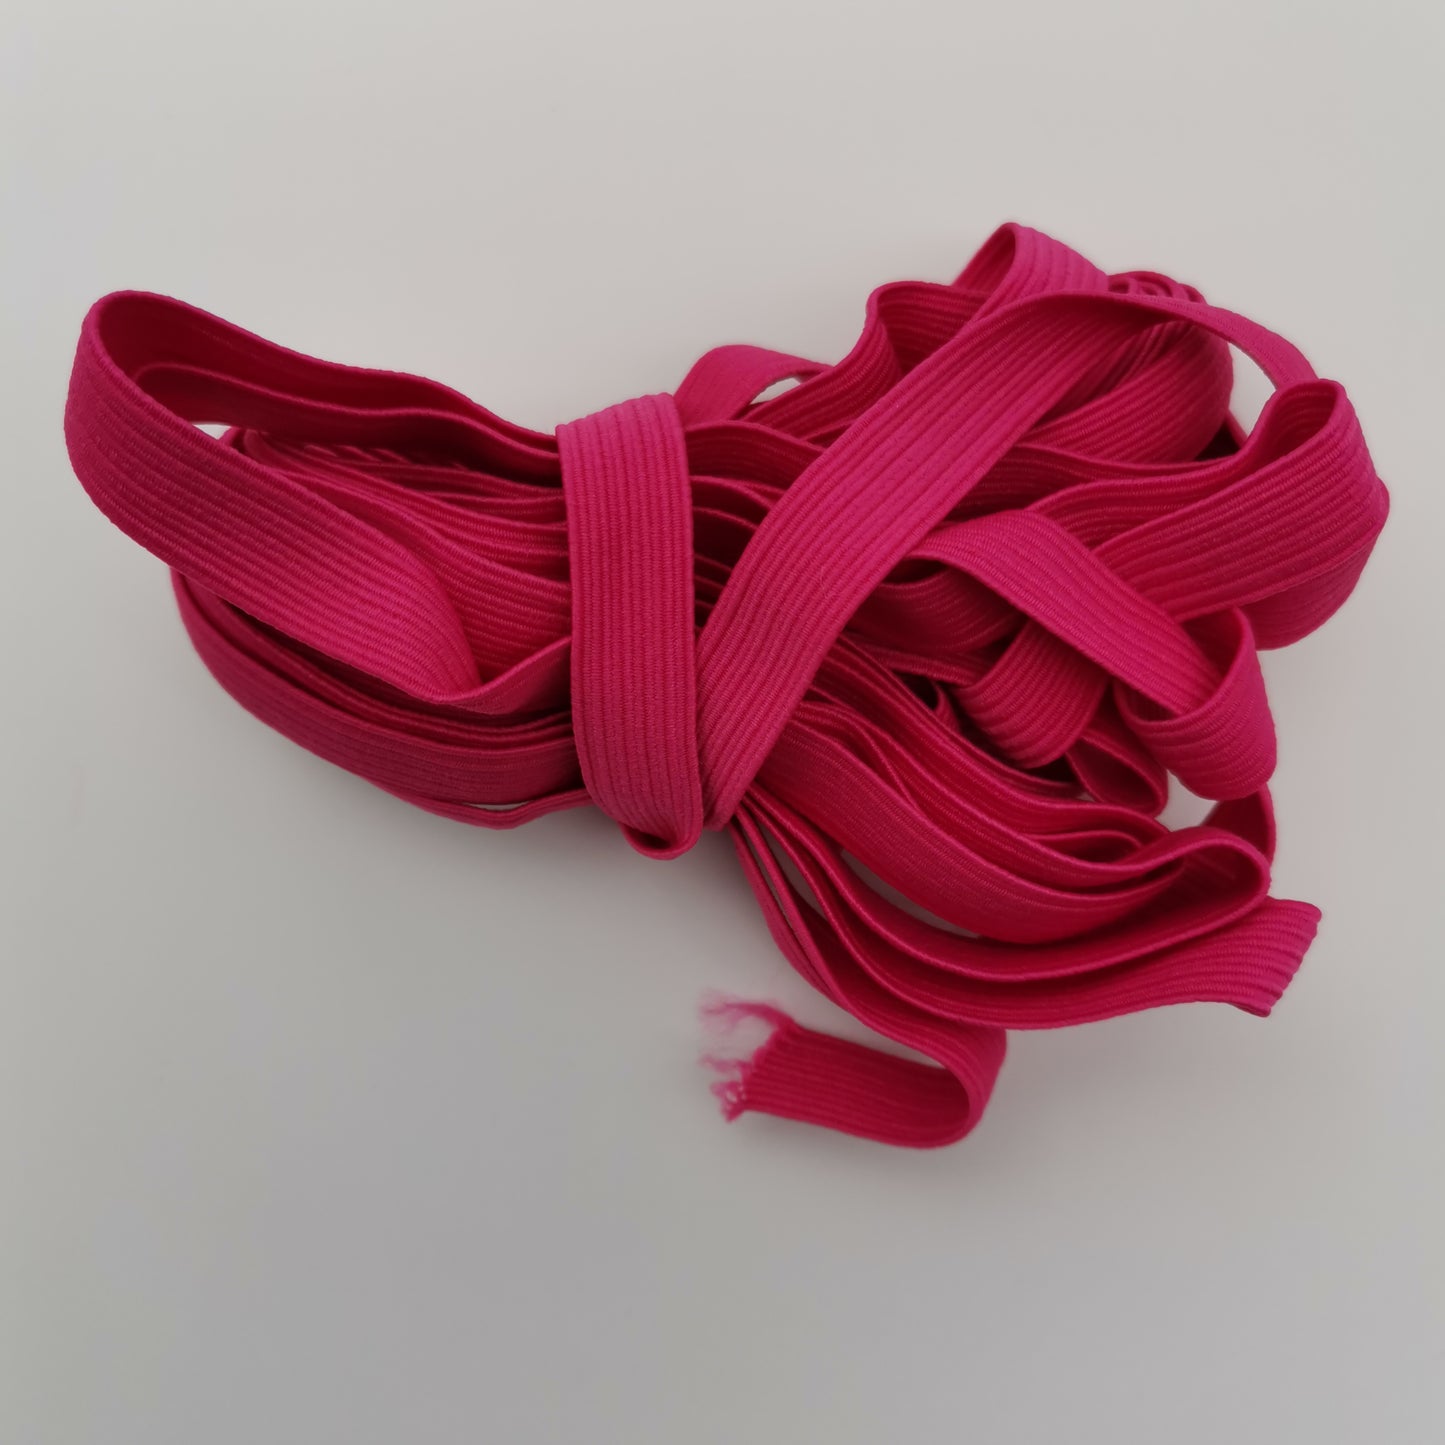 9mm Elastic For Notebook Covers - 30cm Lengths